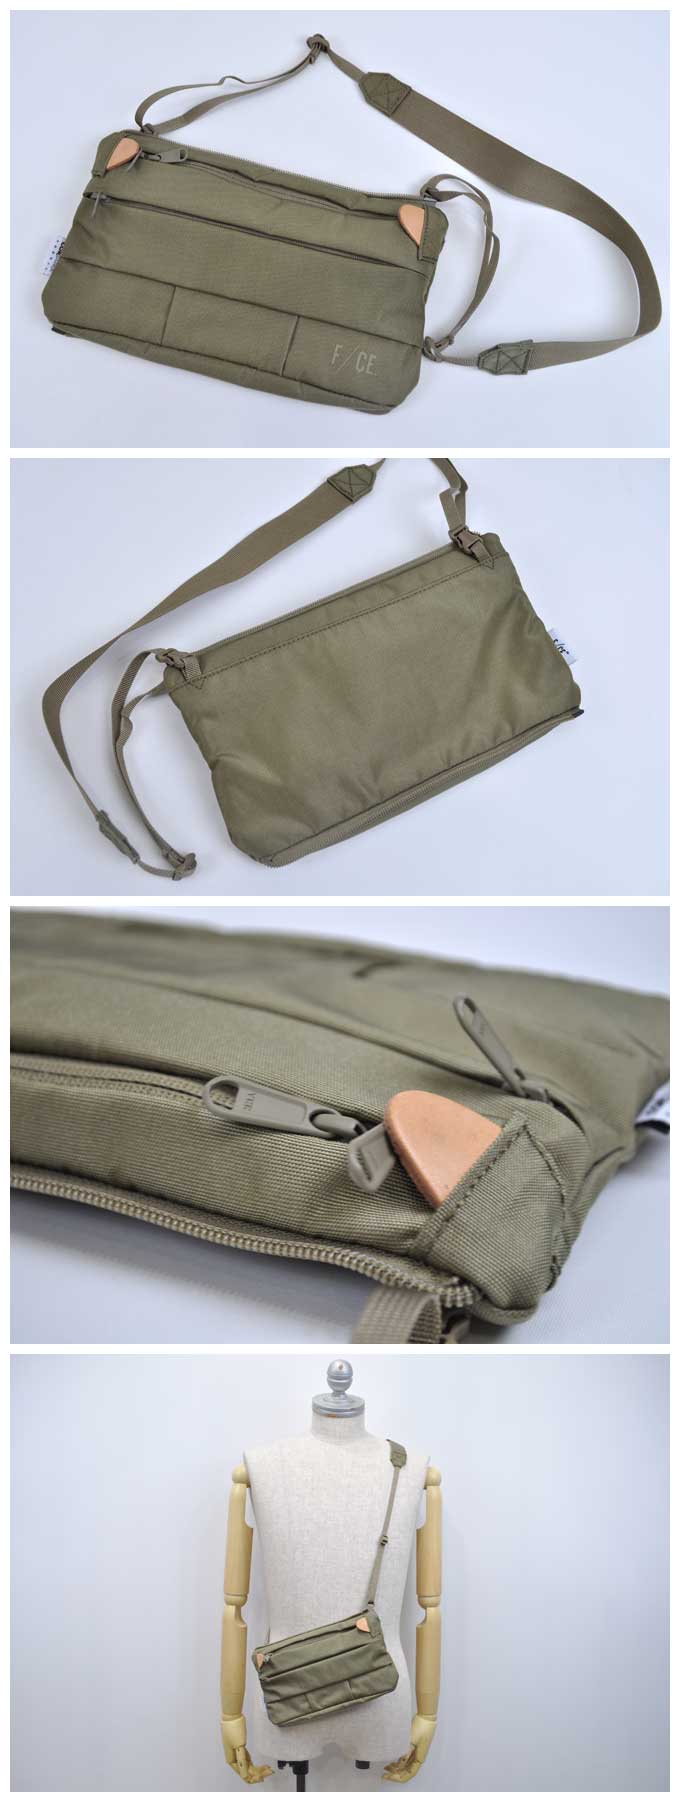 F/CE 630 Small Pouch